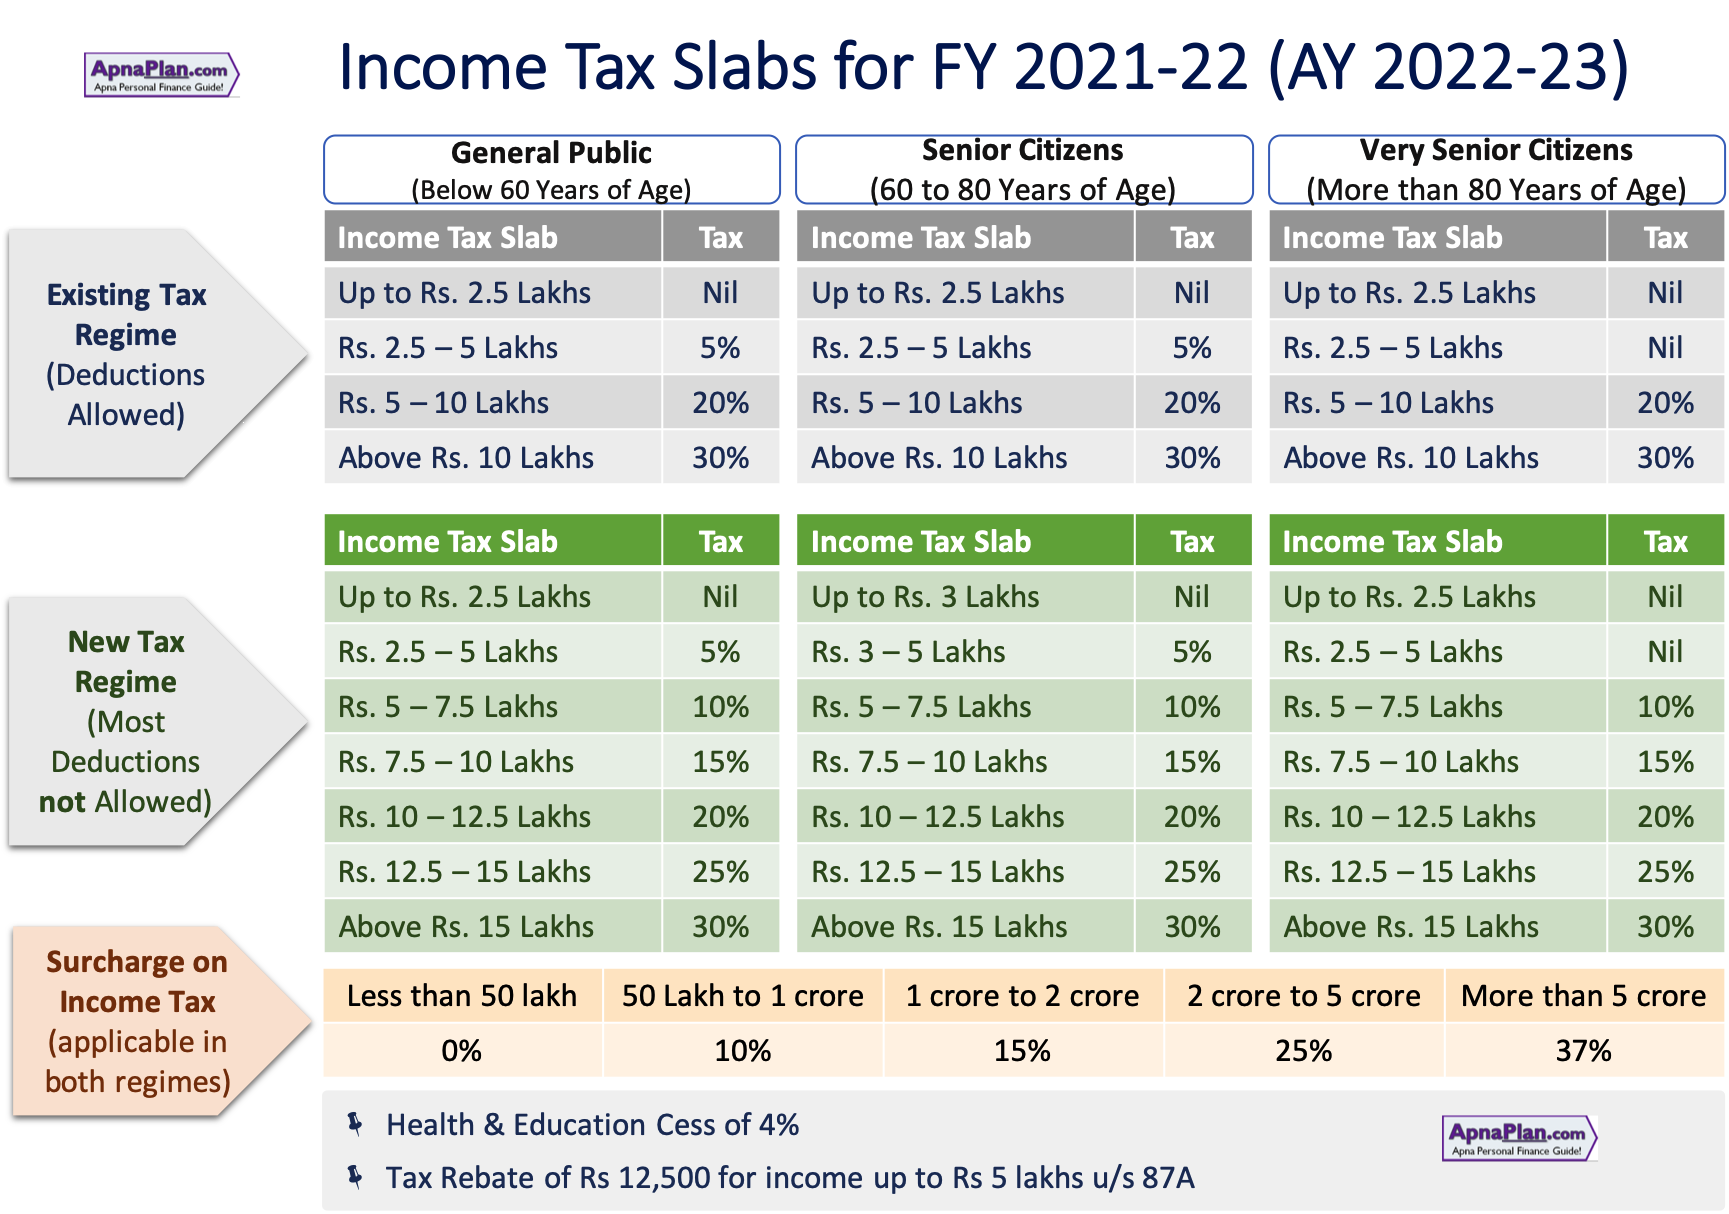 2021 and 2022 tax brackets